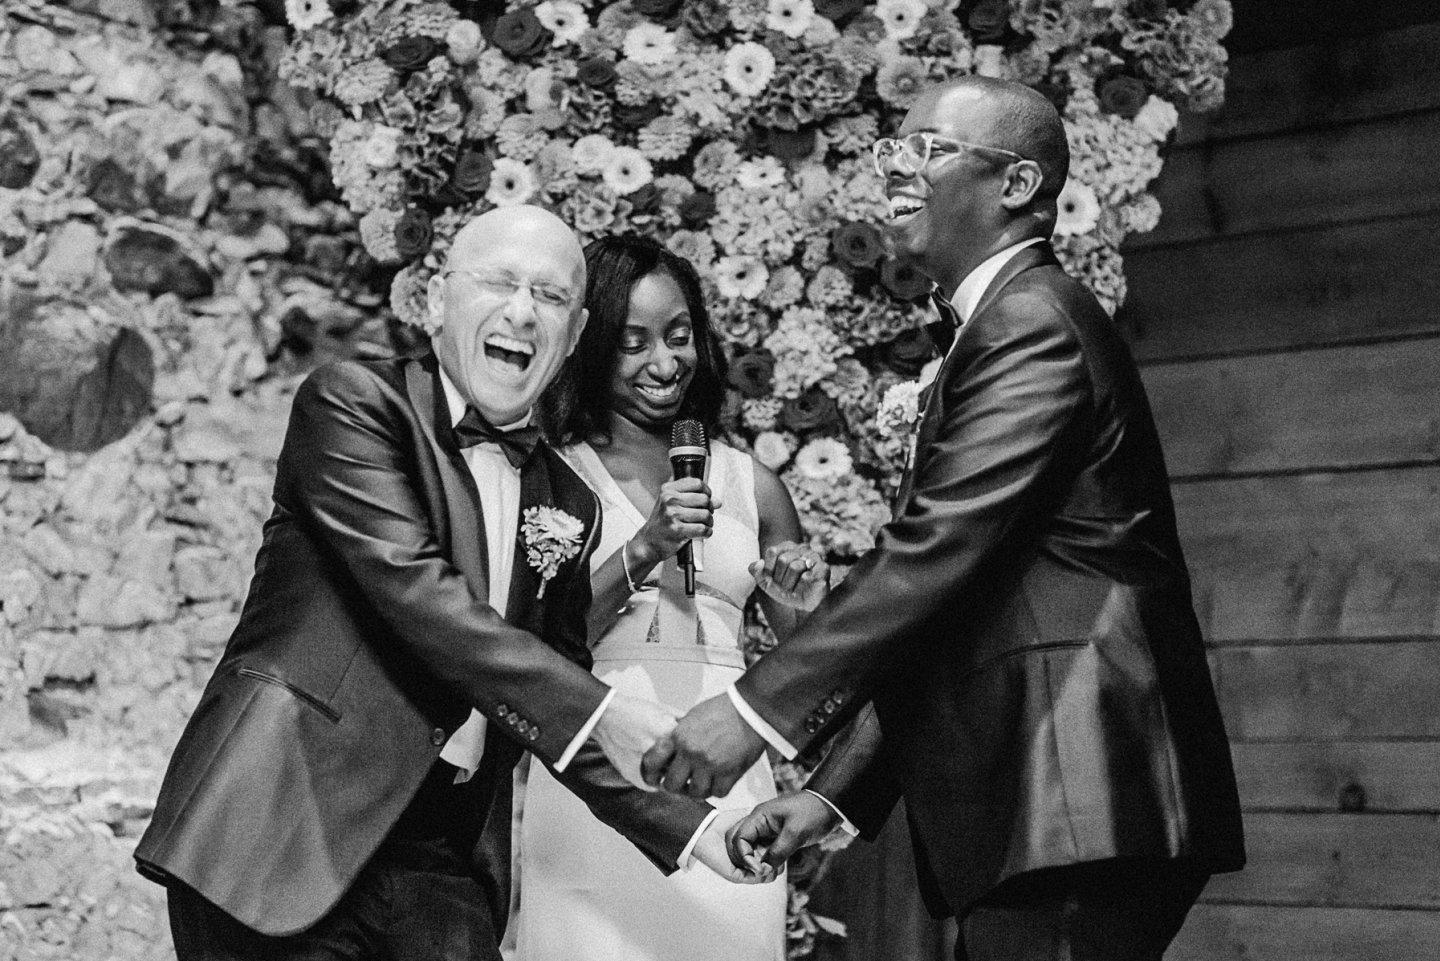 For richer or richer, officiant had a Freudian slip